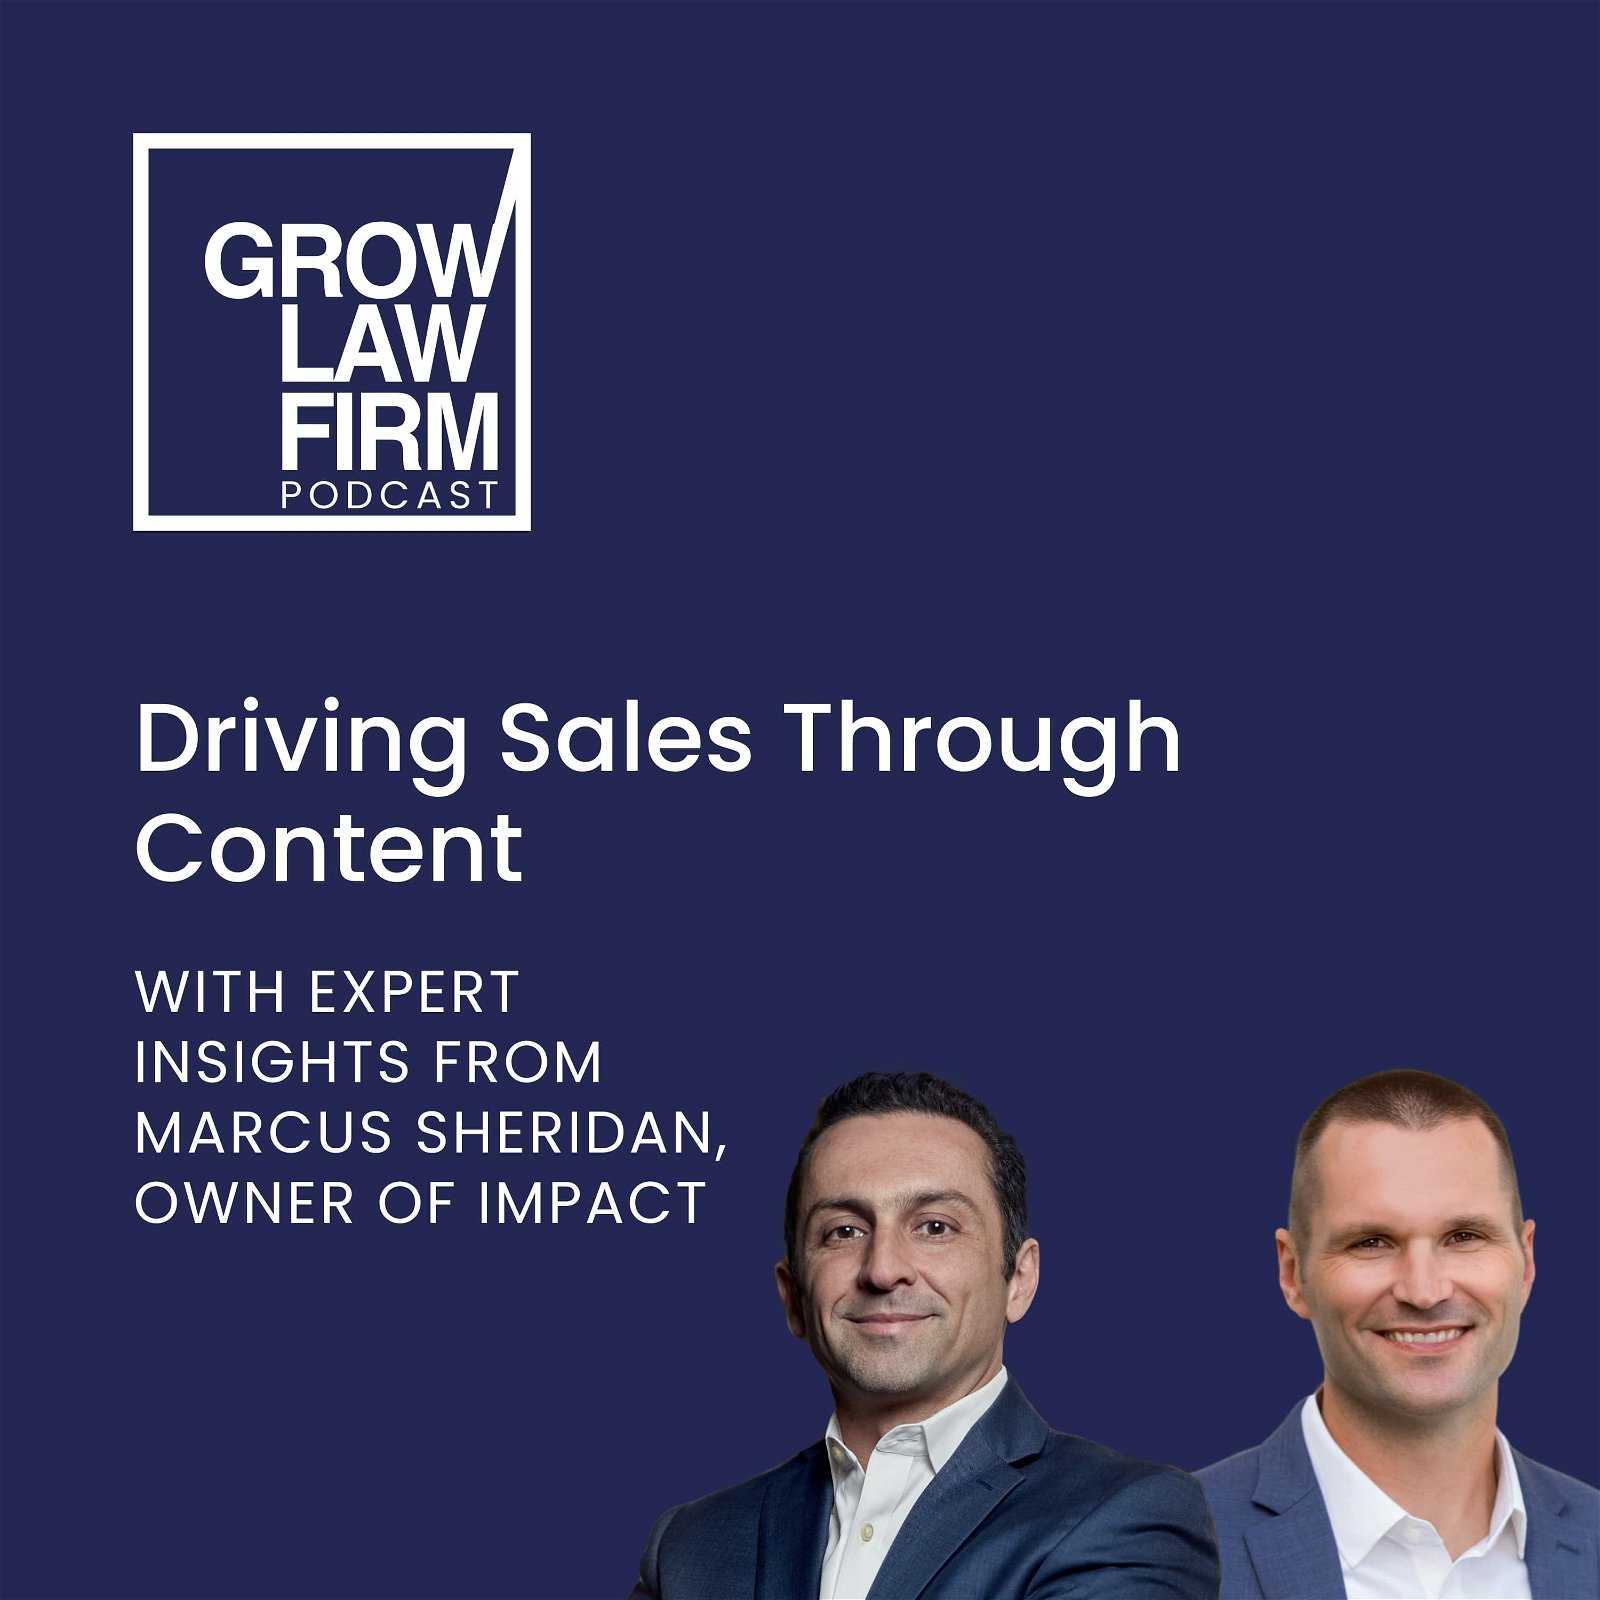 Driving Sales through Content with Expert Insights from Marcus Sheridan, Owner of IMPACT